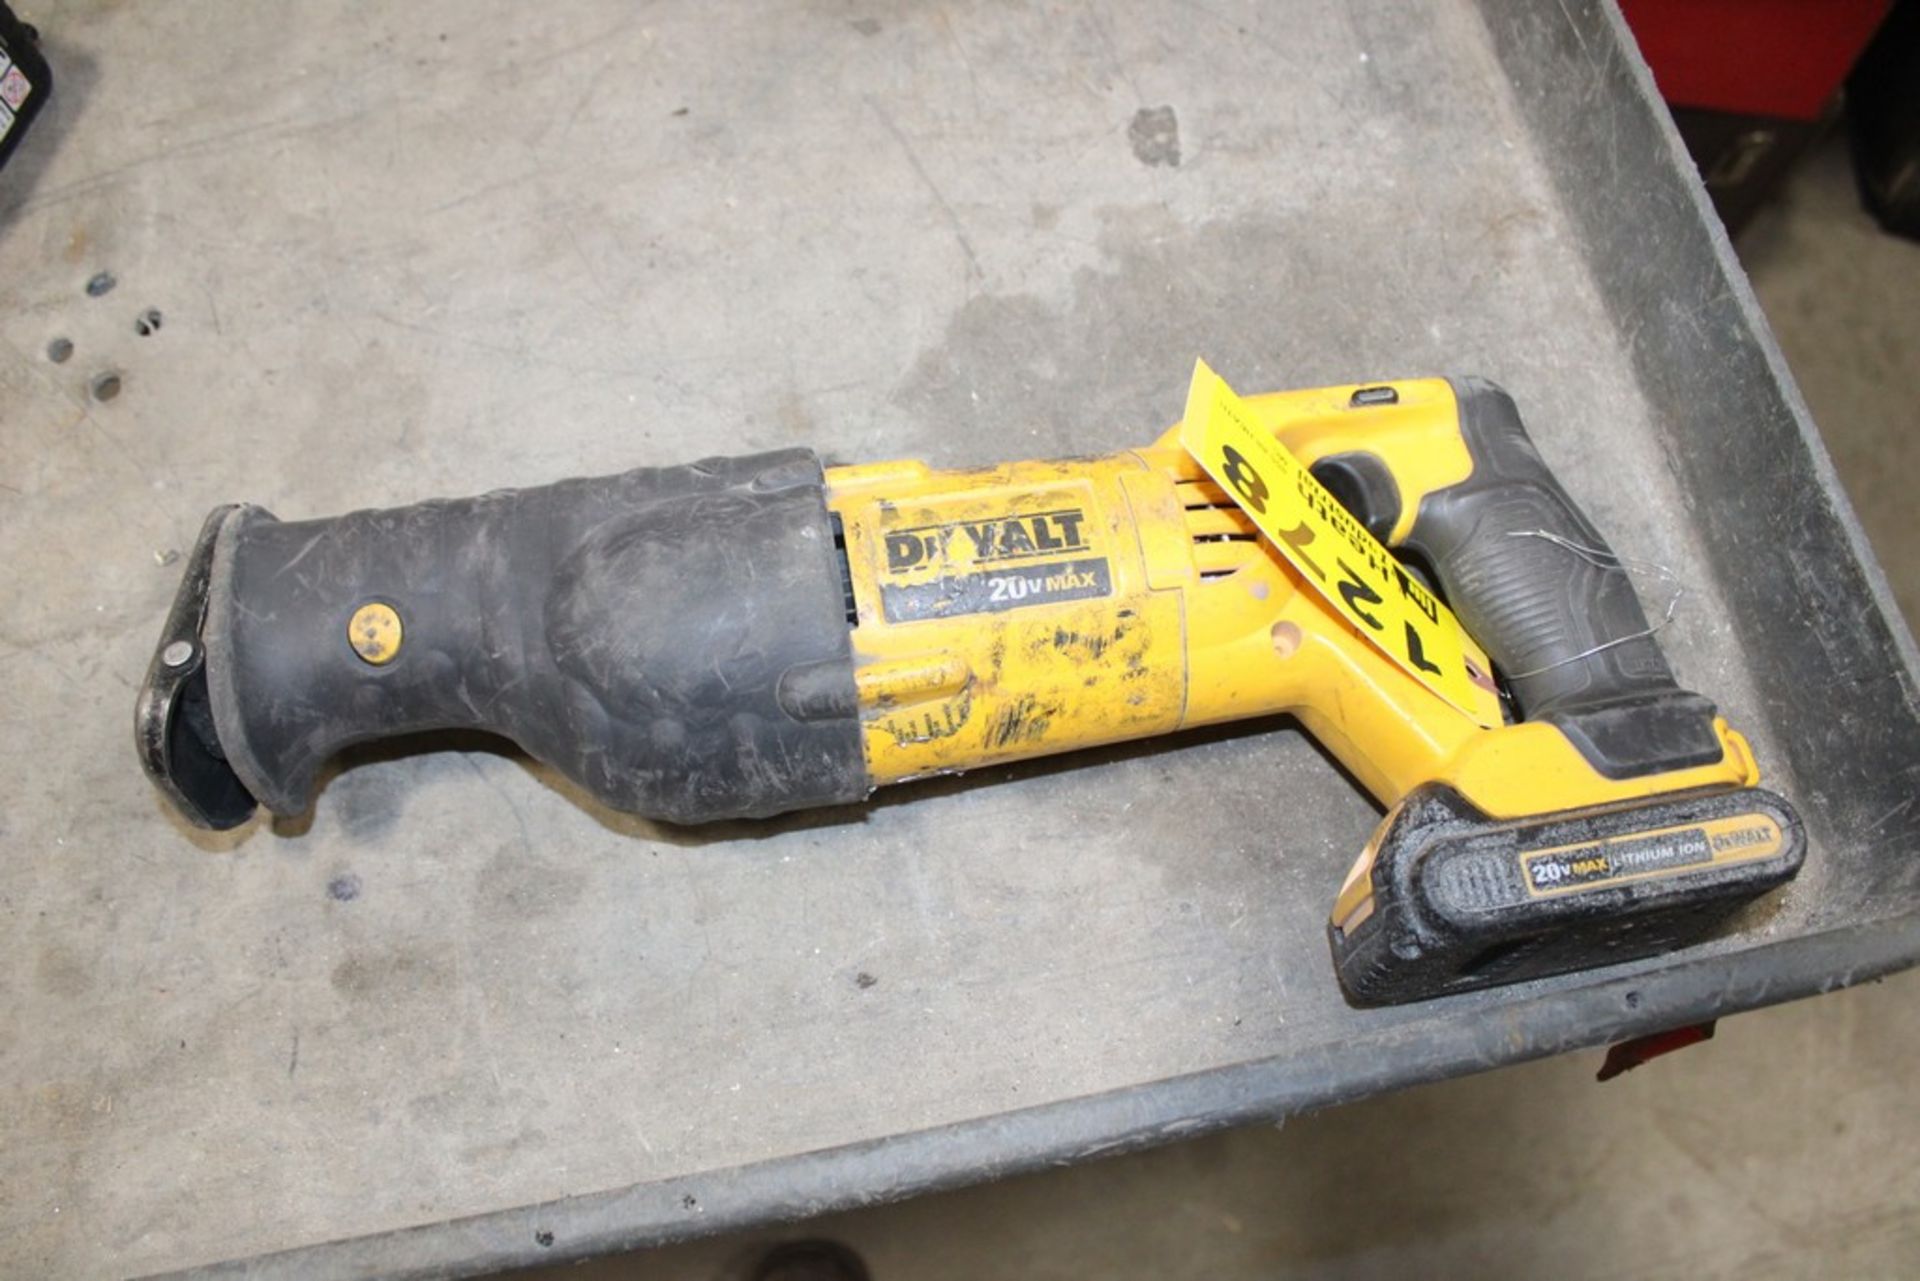 DEWALT MODEL DCS380 20V VARIABLE SPEED RECIPROCATING SAW, WITH BATTERY ( NO CHARGER)